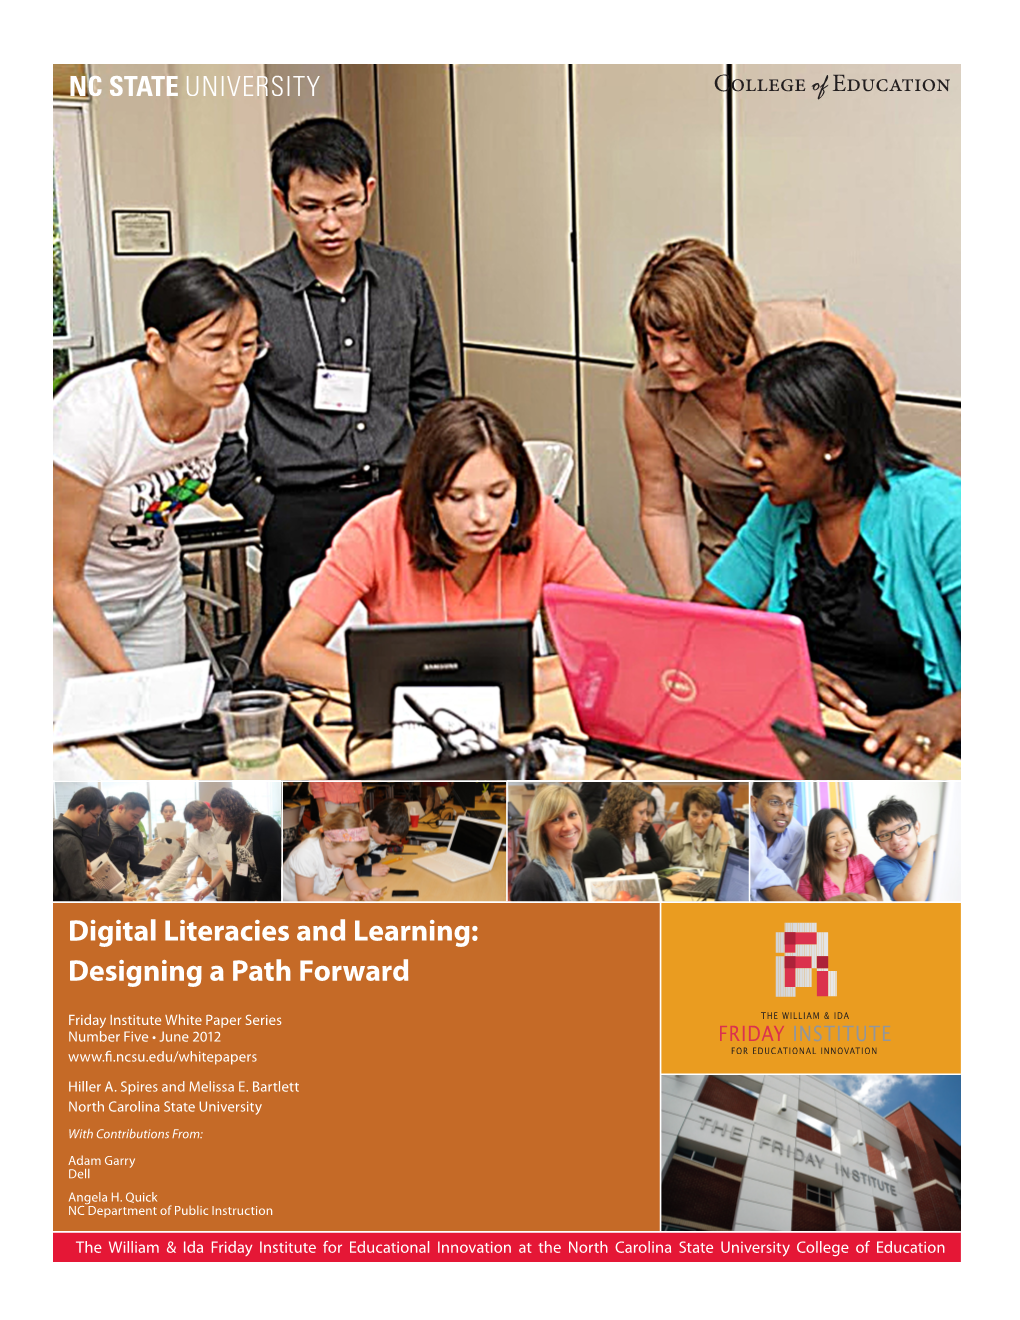 Digital Literacies and Learning: Designing a Path Forward